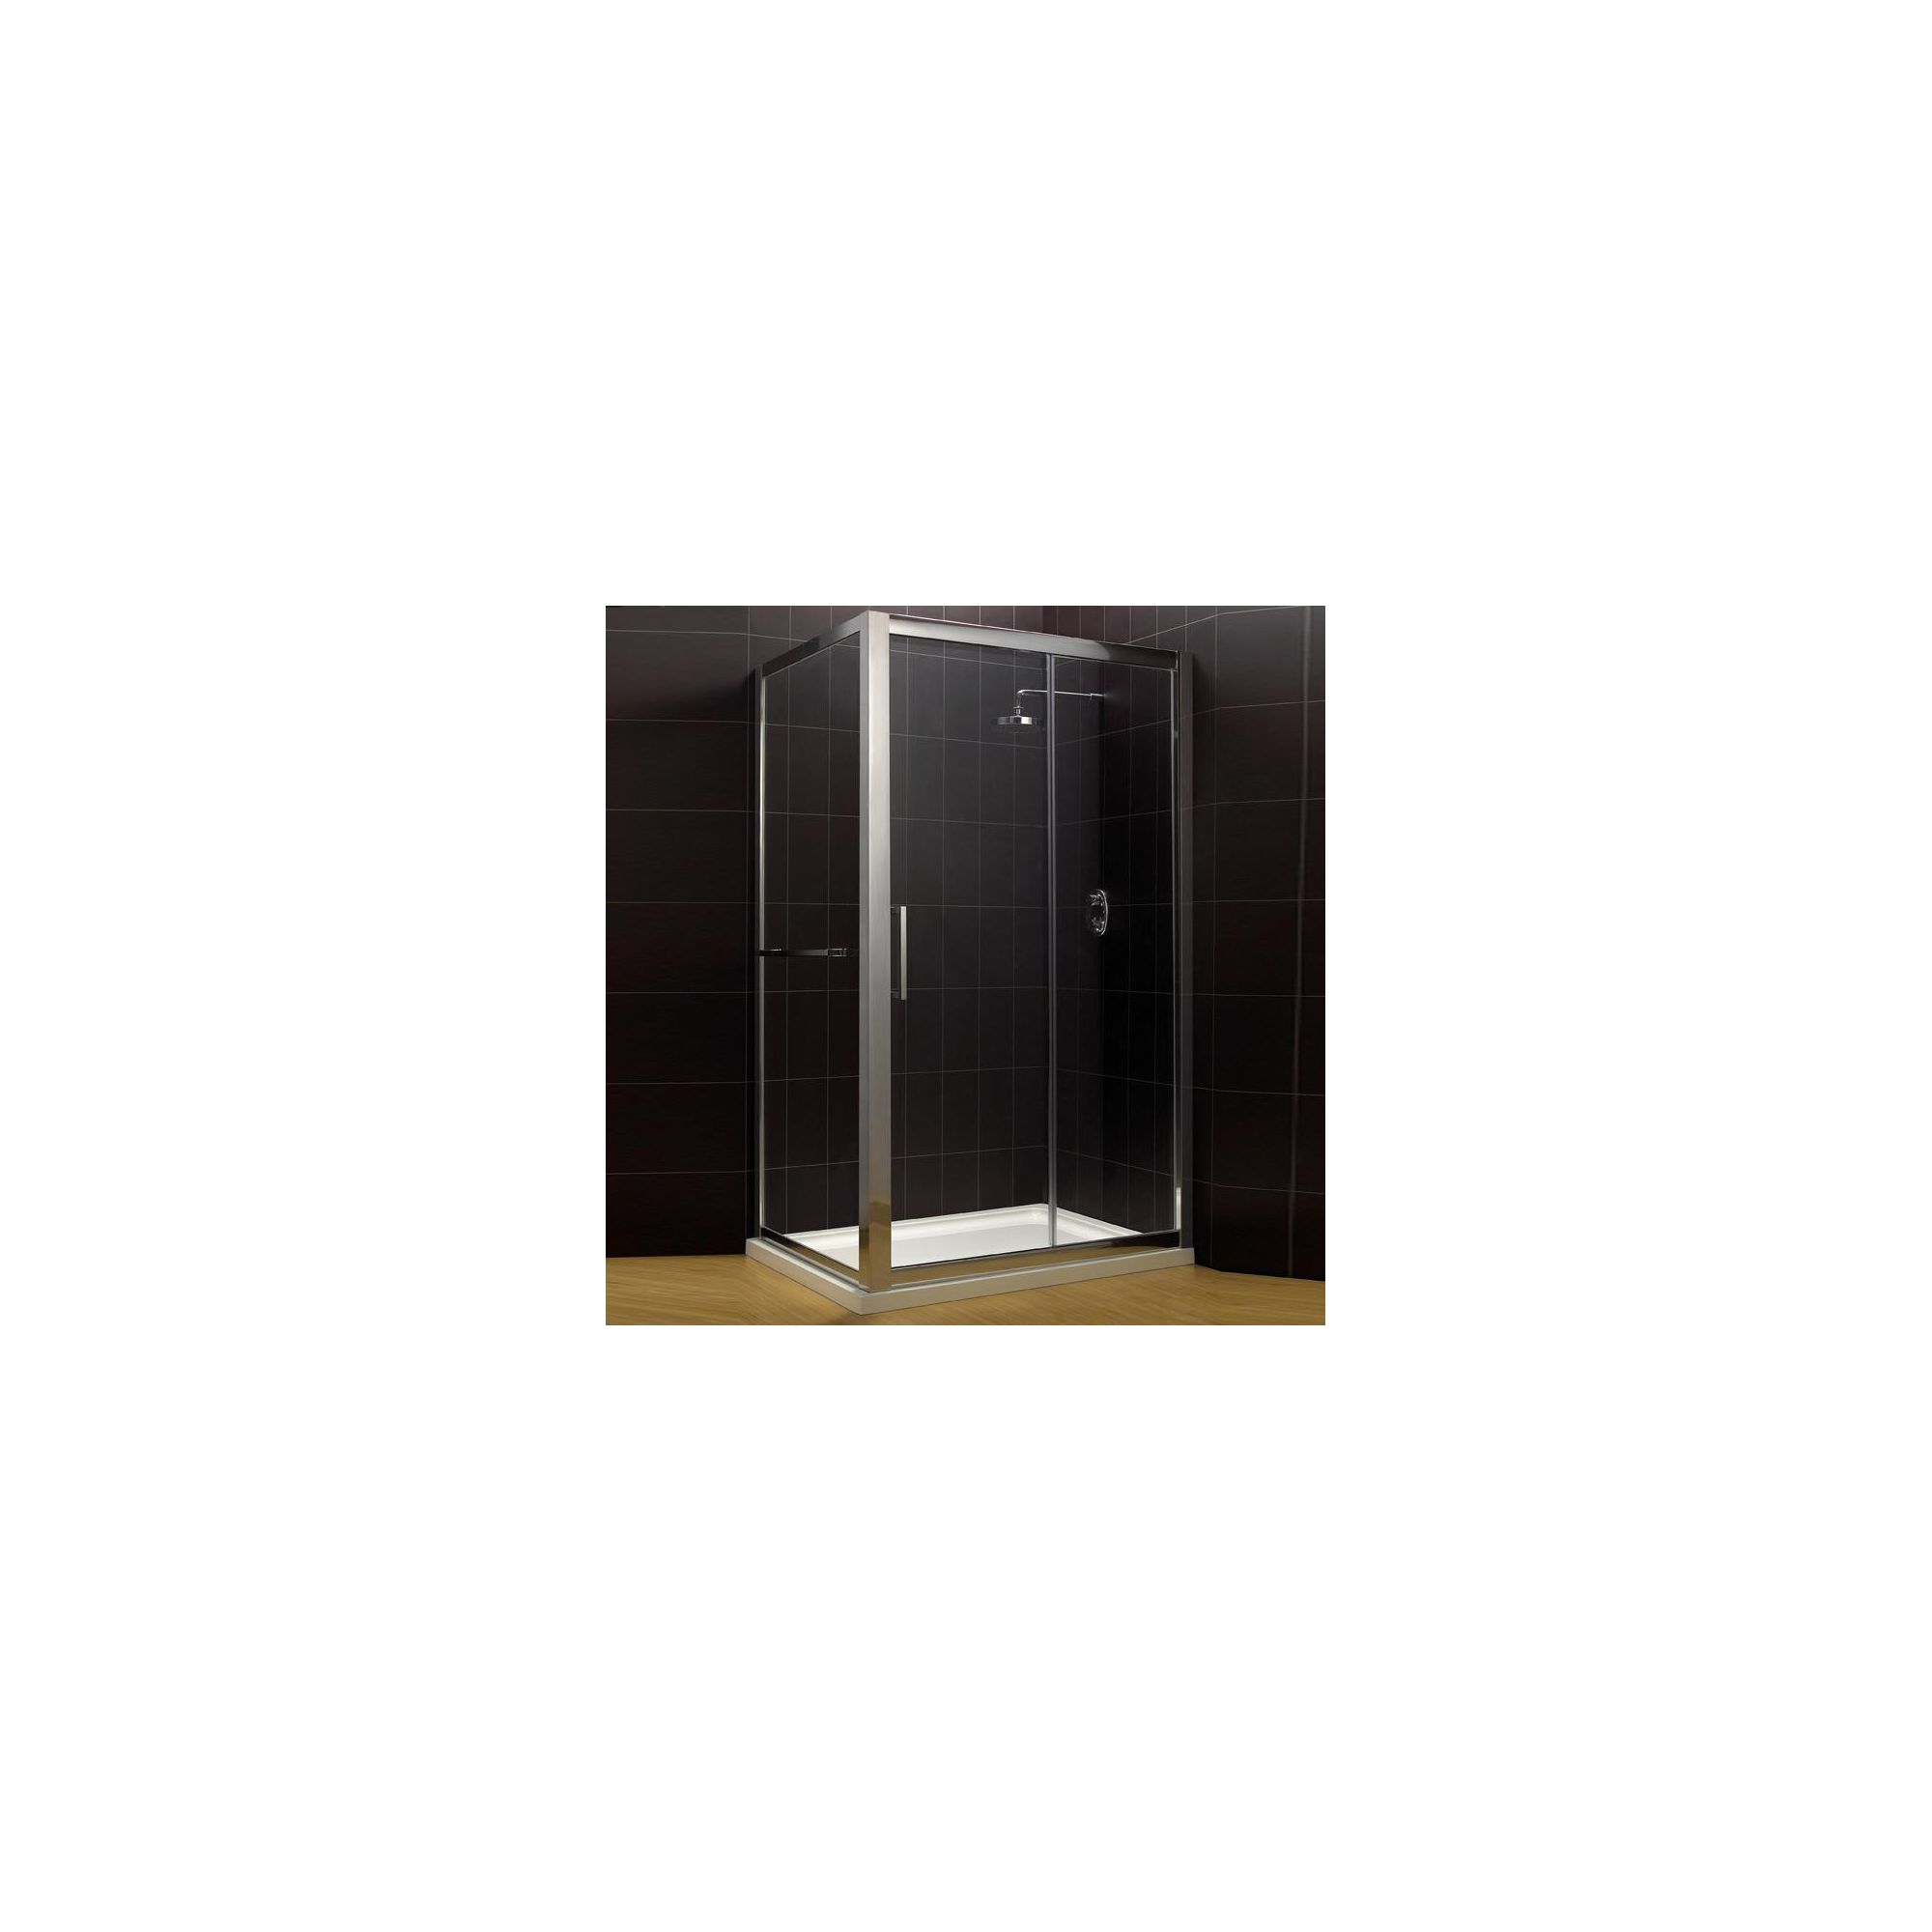 Duchy Supreme Silver Sliding Door Shower Enclosure with Towel Rail, 1400mm x 900mm, Standard Tray, 8mm Glass at Tesco Direct